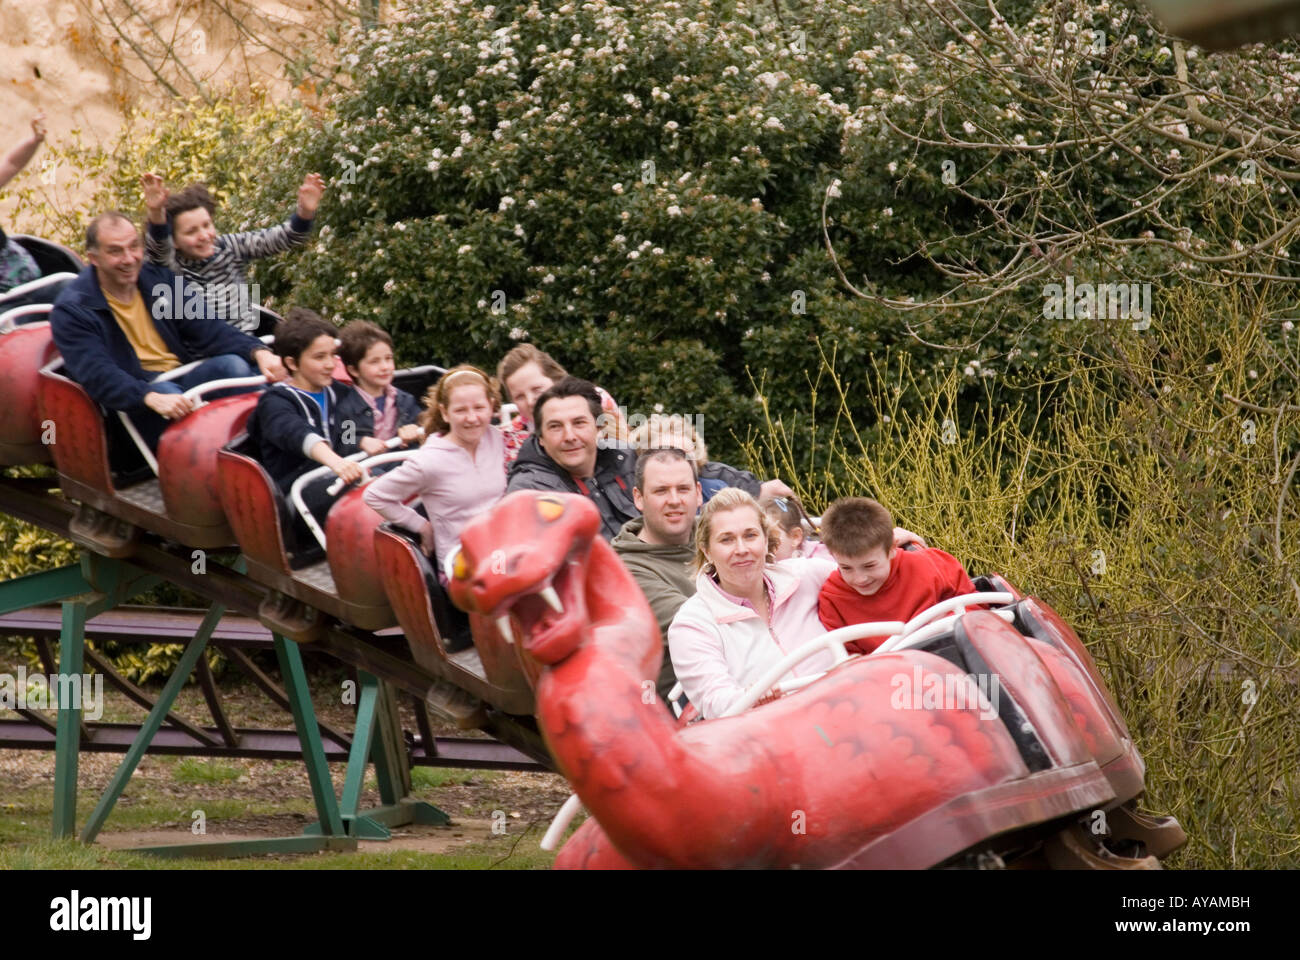 The Snake In The Grass Rollercoaster At Pleasurewood Hills Theme Park,Suffolk,Uk Stock Photo